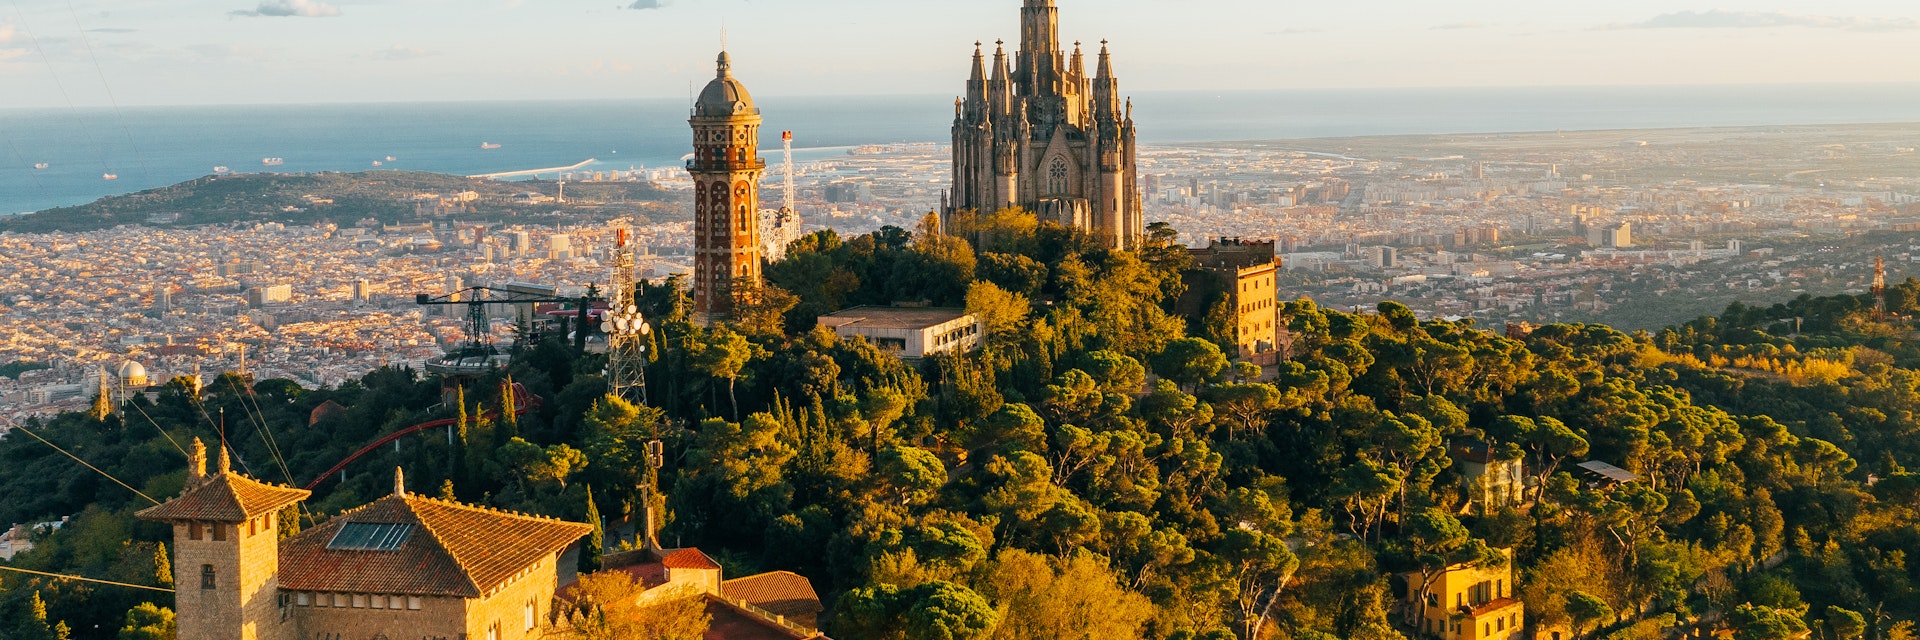 Temple of the Sacred Heart of Jesus at Mount Tibidabo, Barcelona, Spain.
